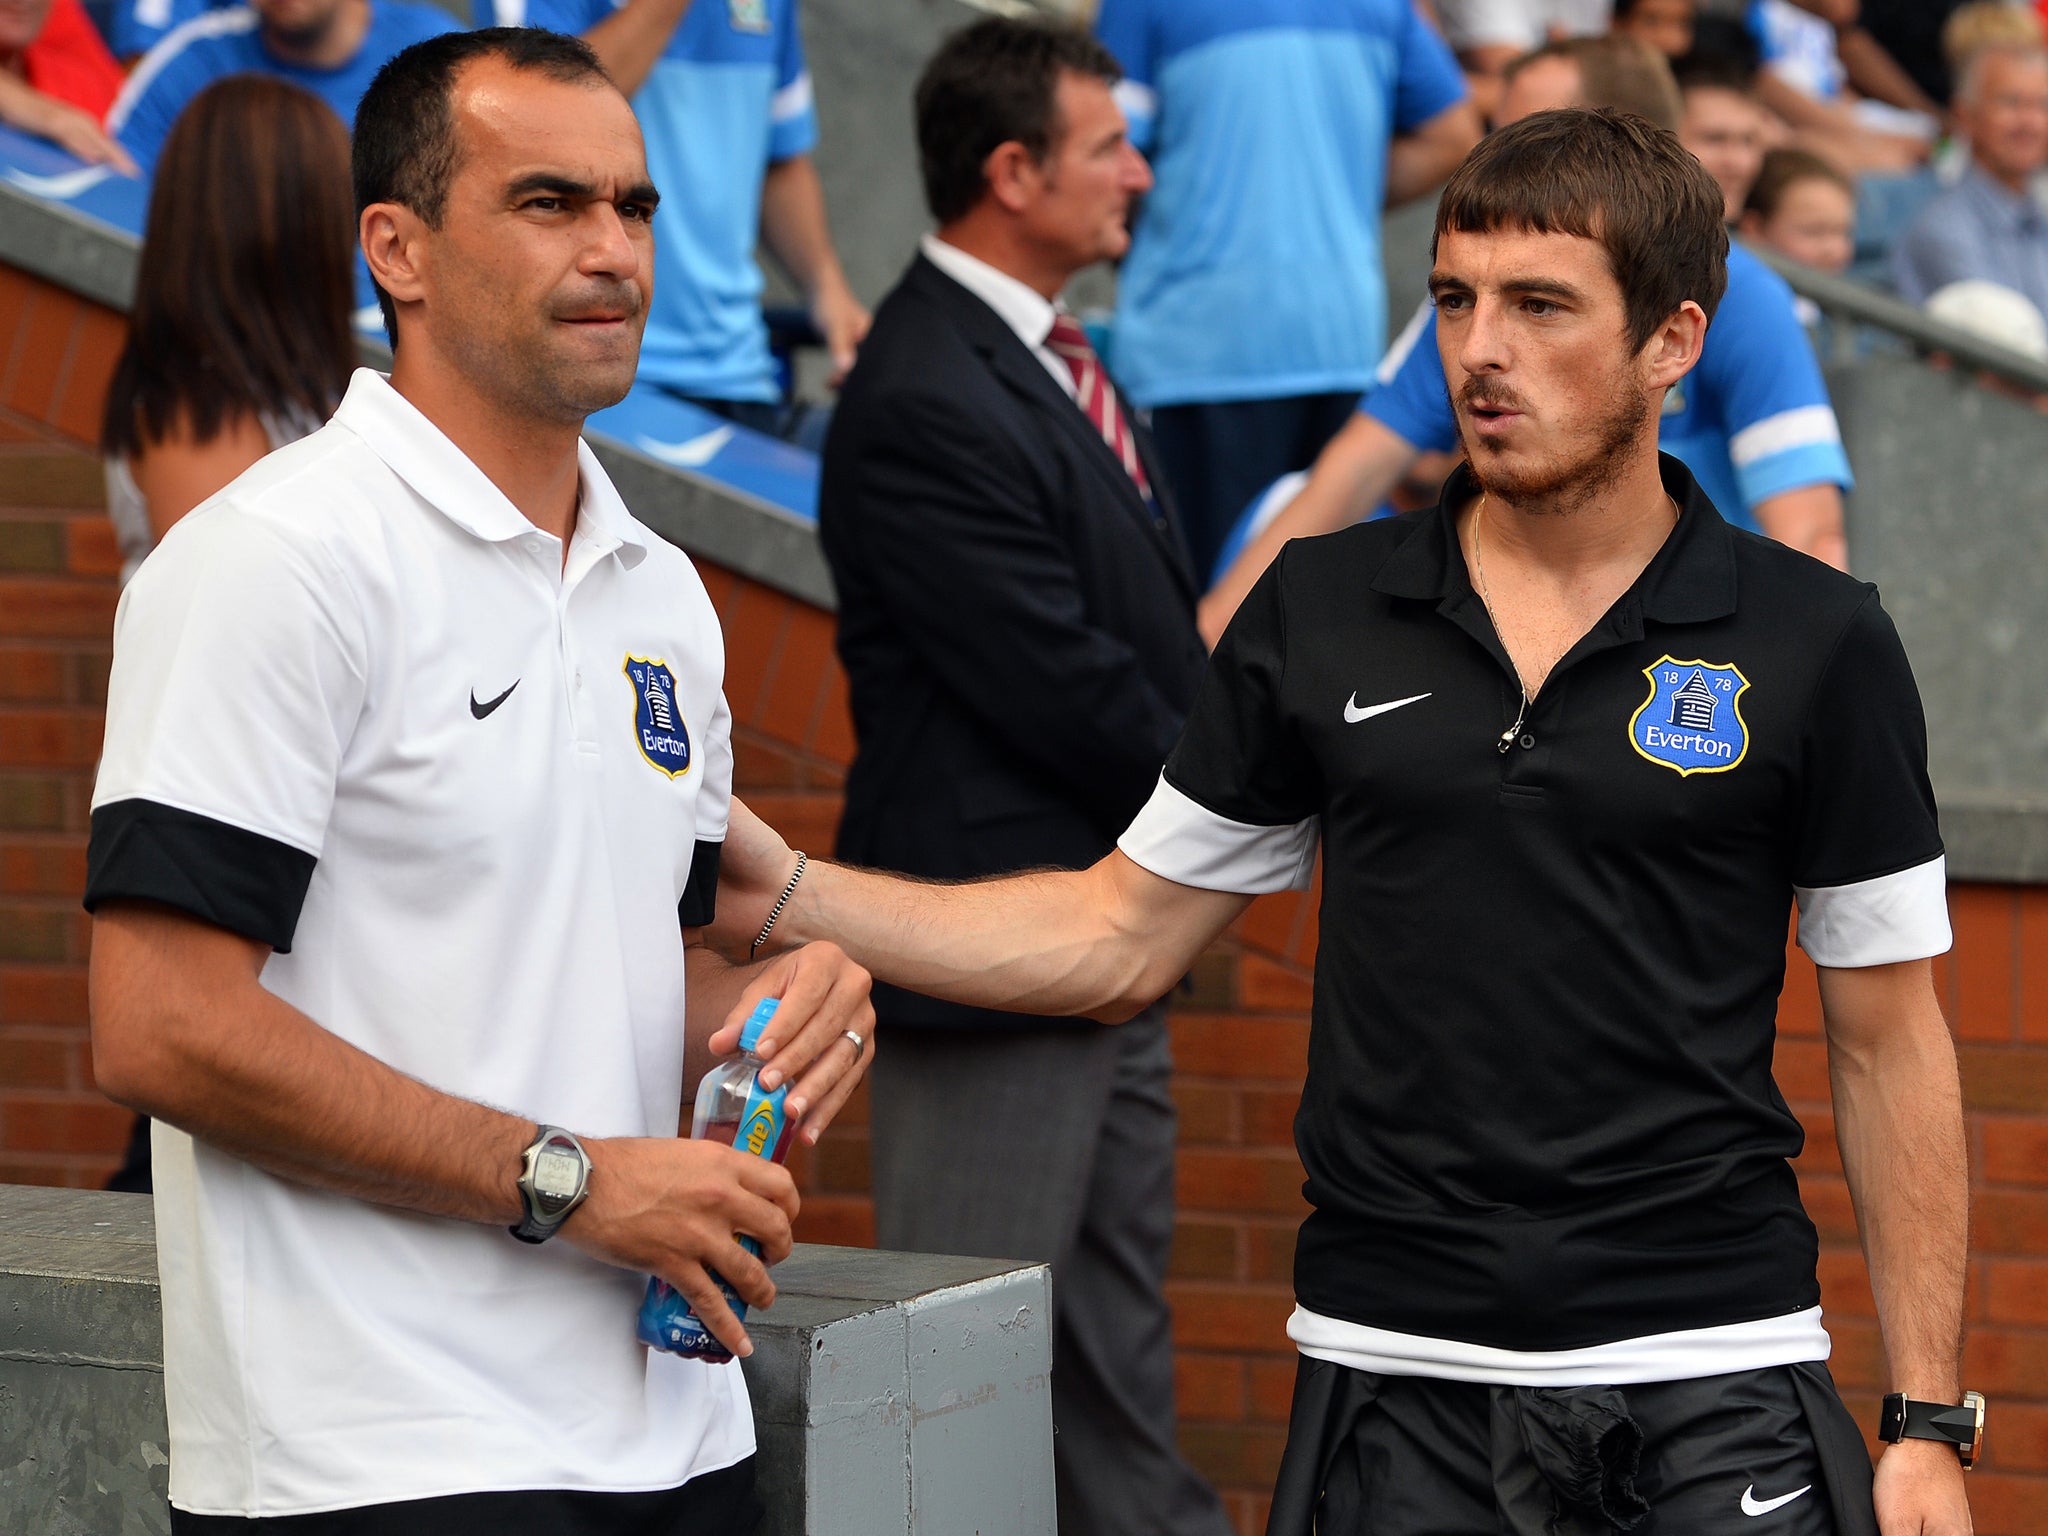 Roberto Martinez is confident Leighton Baines will stay with Everton despite Manchester United interest